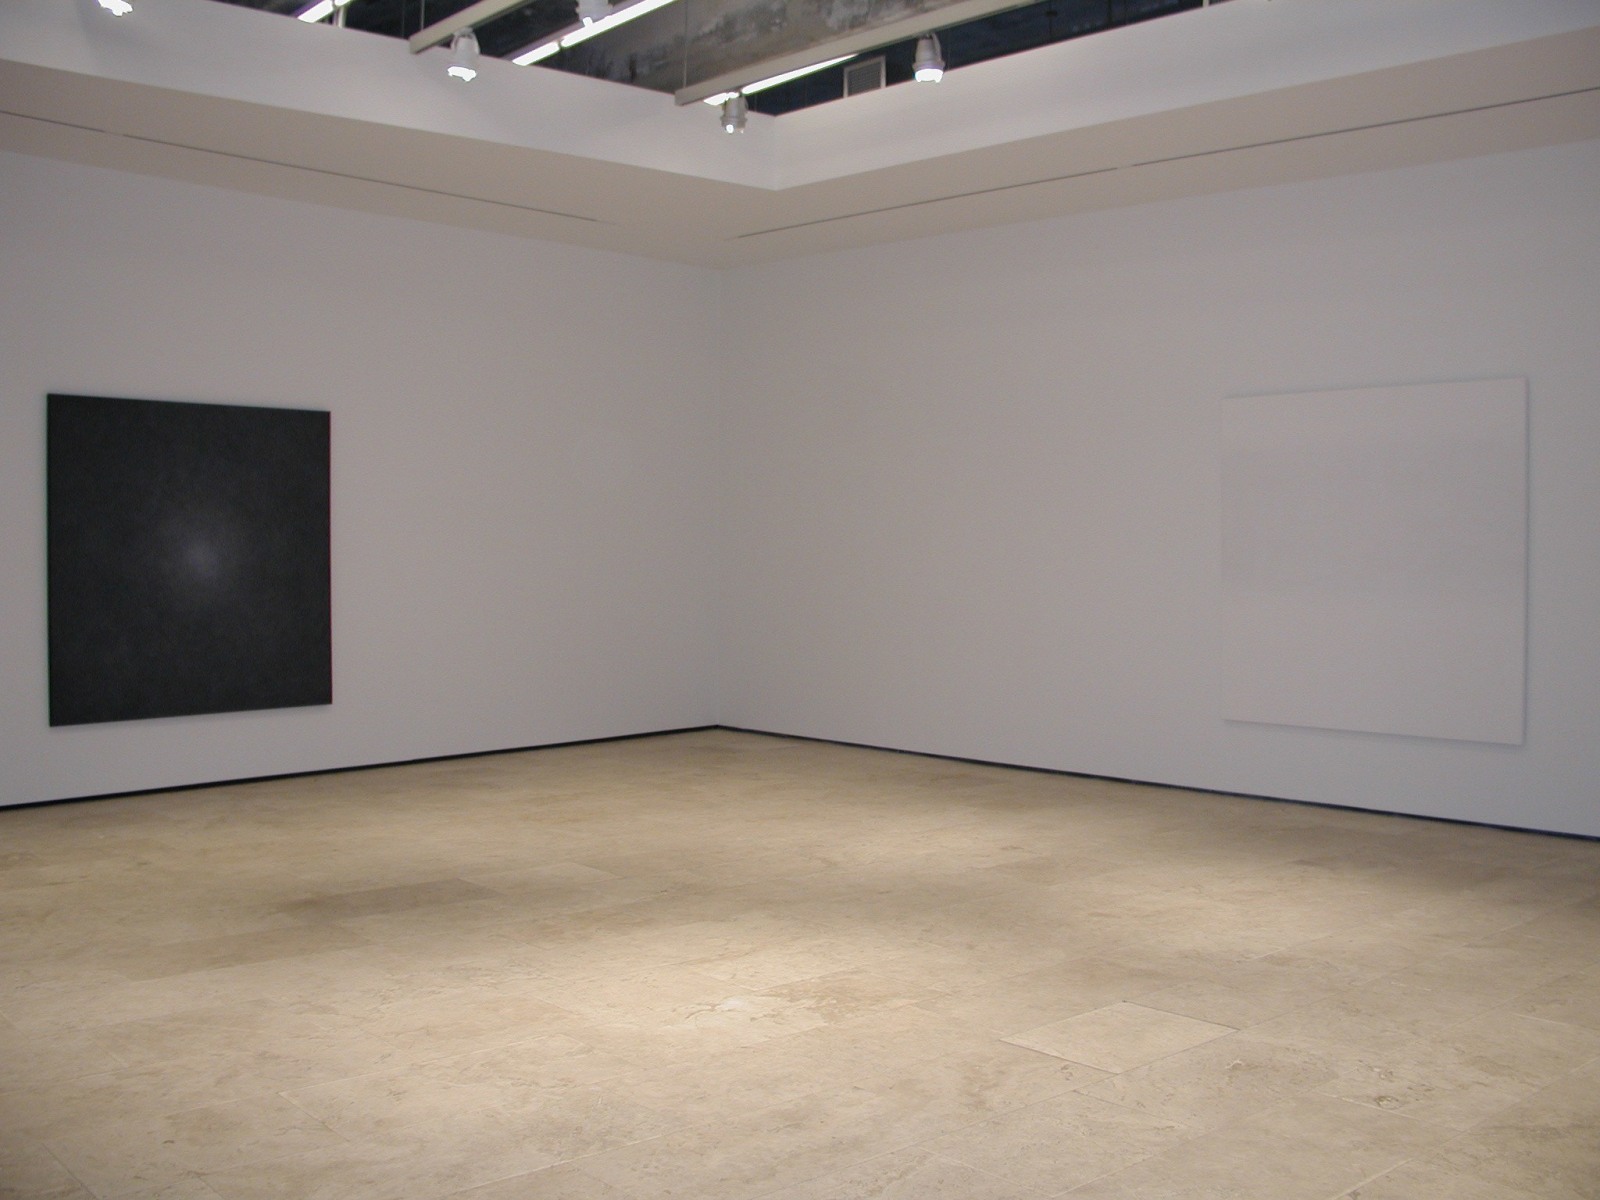 Installation view of Shirazeh Houshiary exhibition in 2003 at Lehmann Maupin in New York, view 3